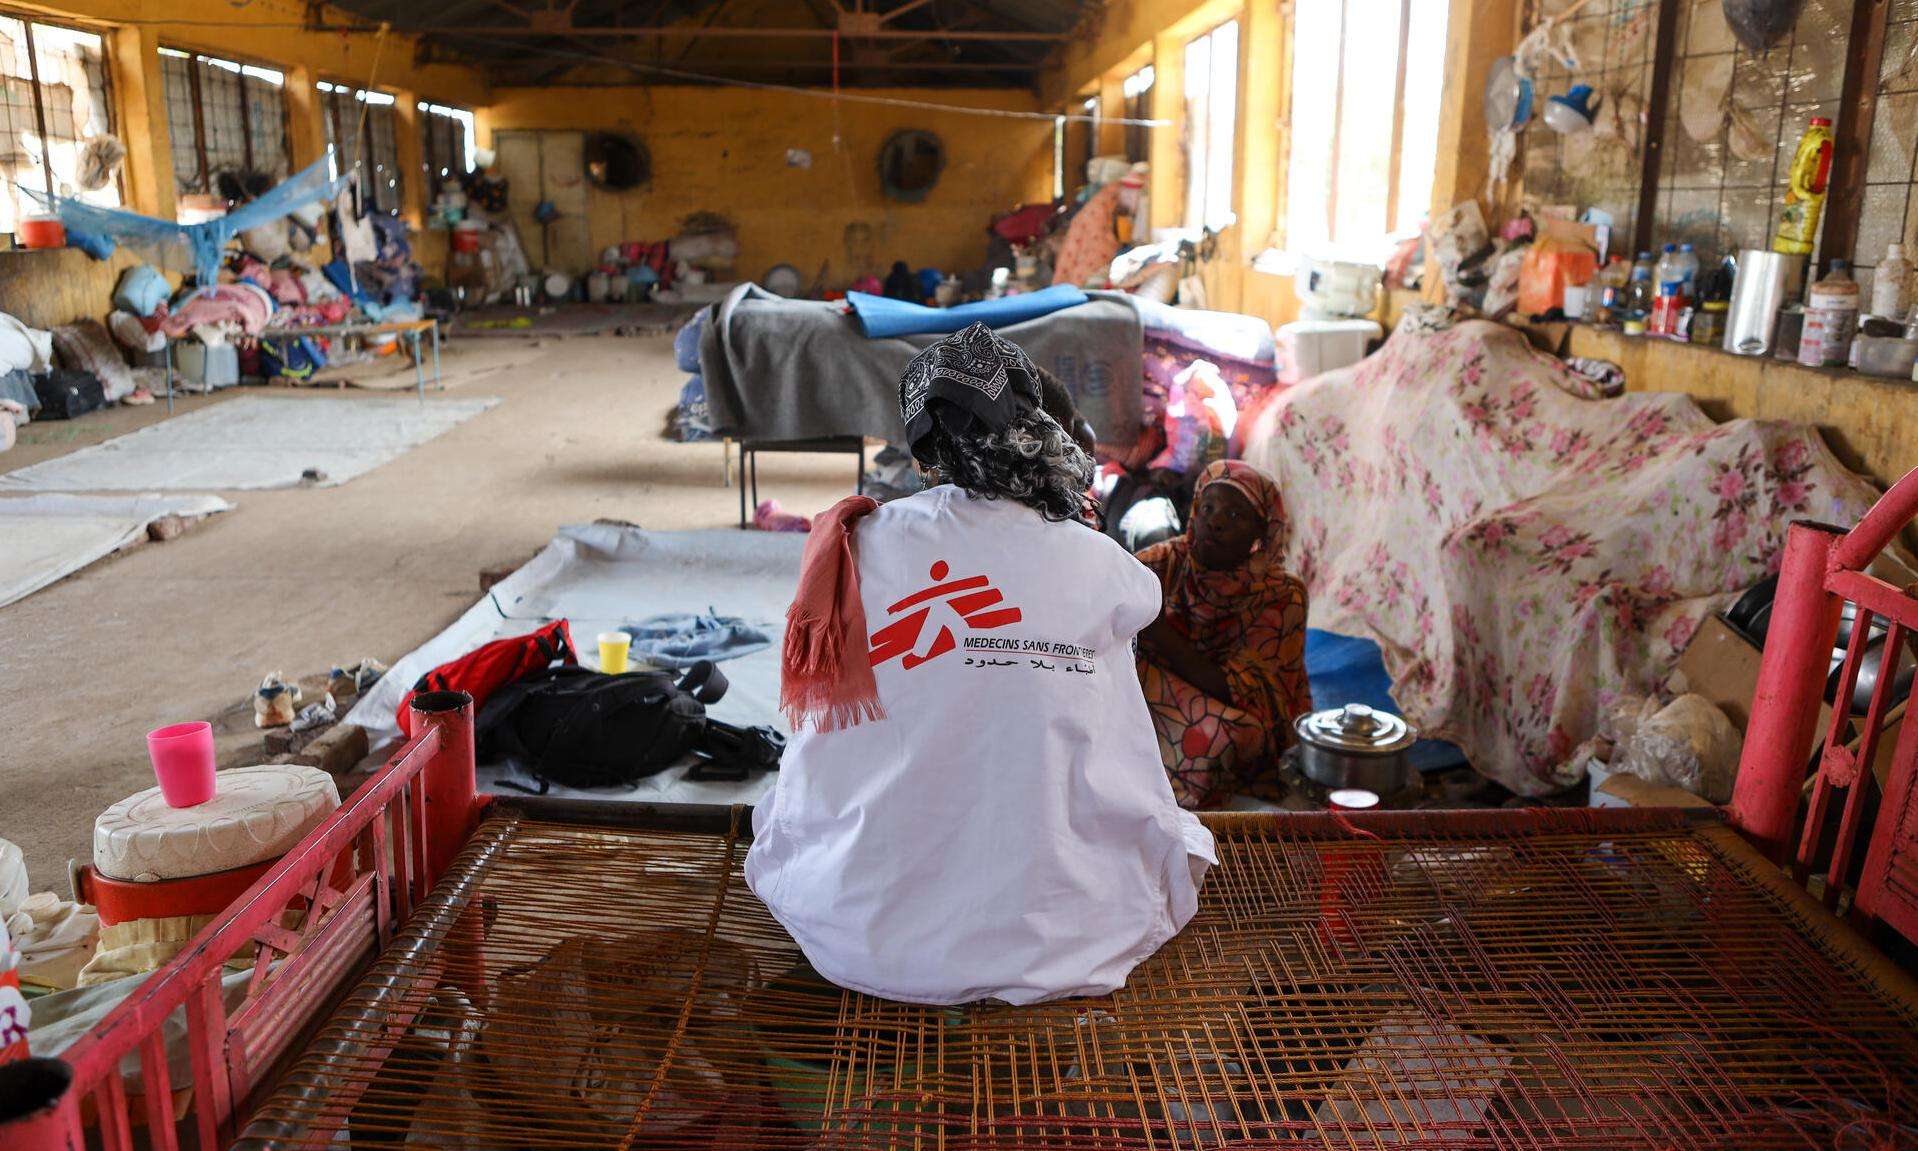 The back of an MSF staff member sitting in a room in Wad Madani, Sudan.